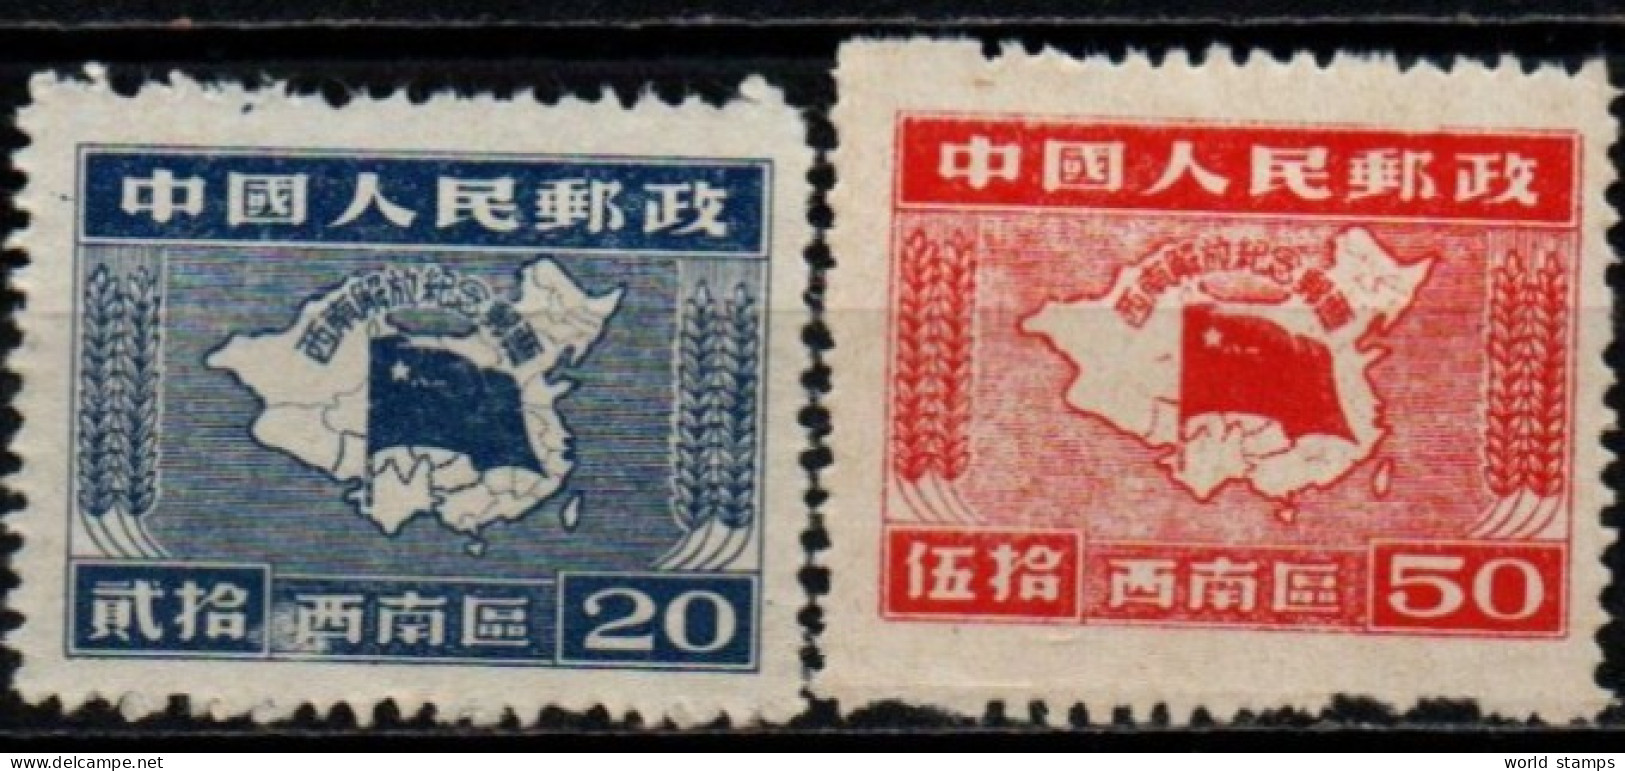 CHINE DU SUD-OUEST 1950 SANS GOMME - South-Western China 1949-50